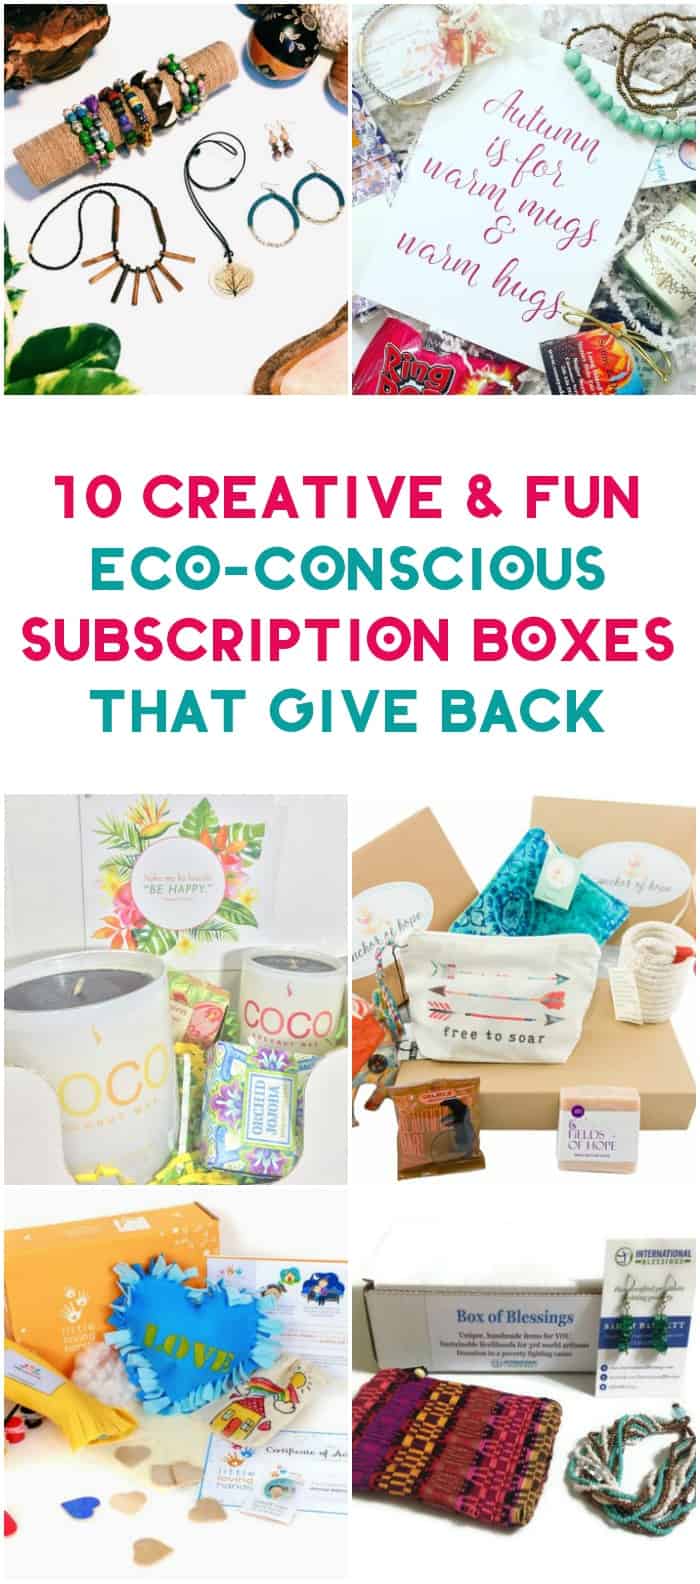 Want to give a gift that not only keeps giving, but also gives back? You'll love these fair trade, eco-friendly, and/or cause-related subscription boxes that I dug up for you! Each one features ethically made and sourced items that help communities in need all over the globe.